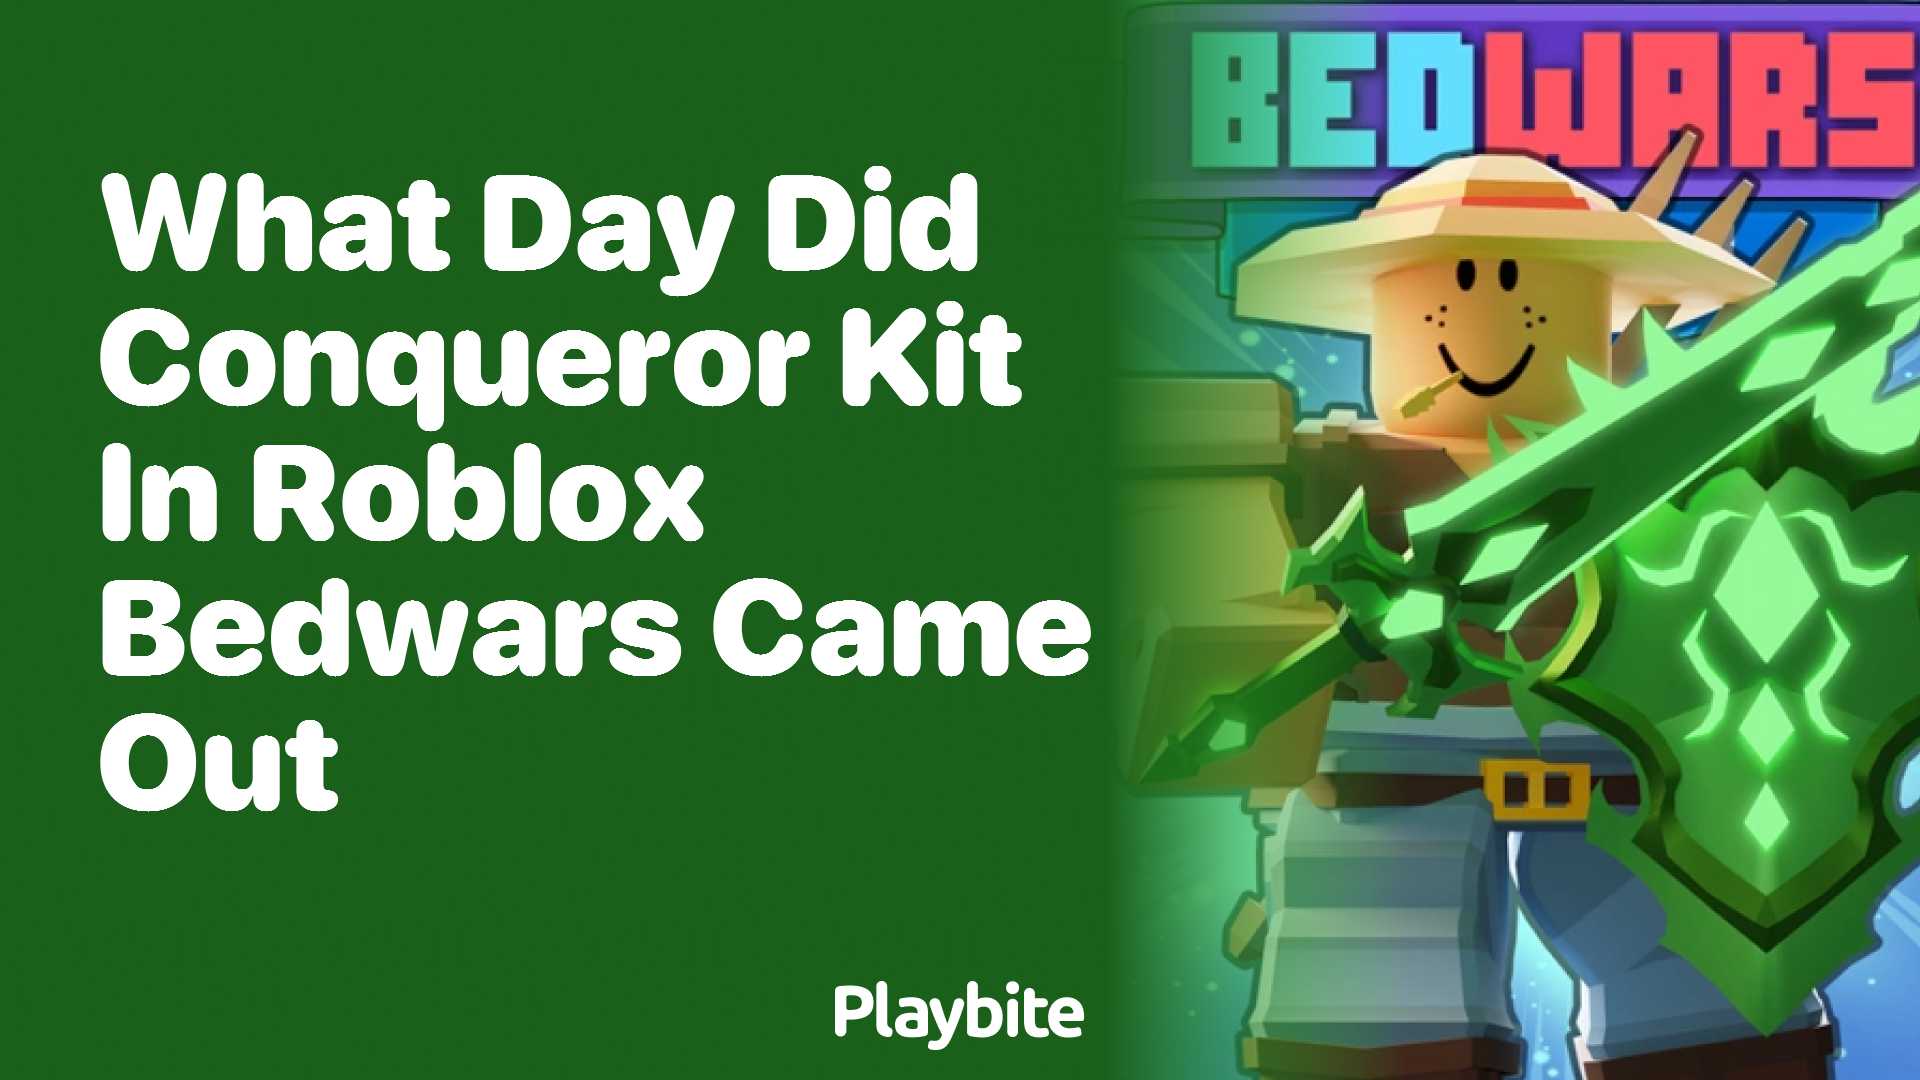 What Day Did the Conqueror Kit in Roblox Bedwars Come Out?